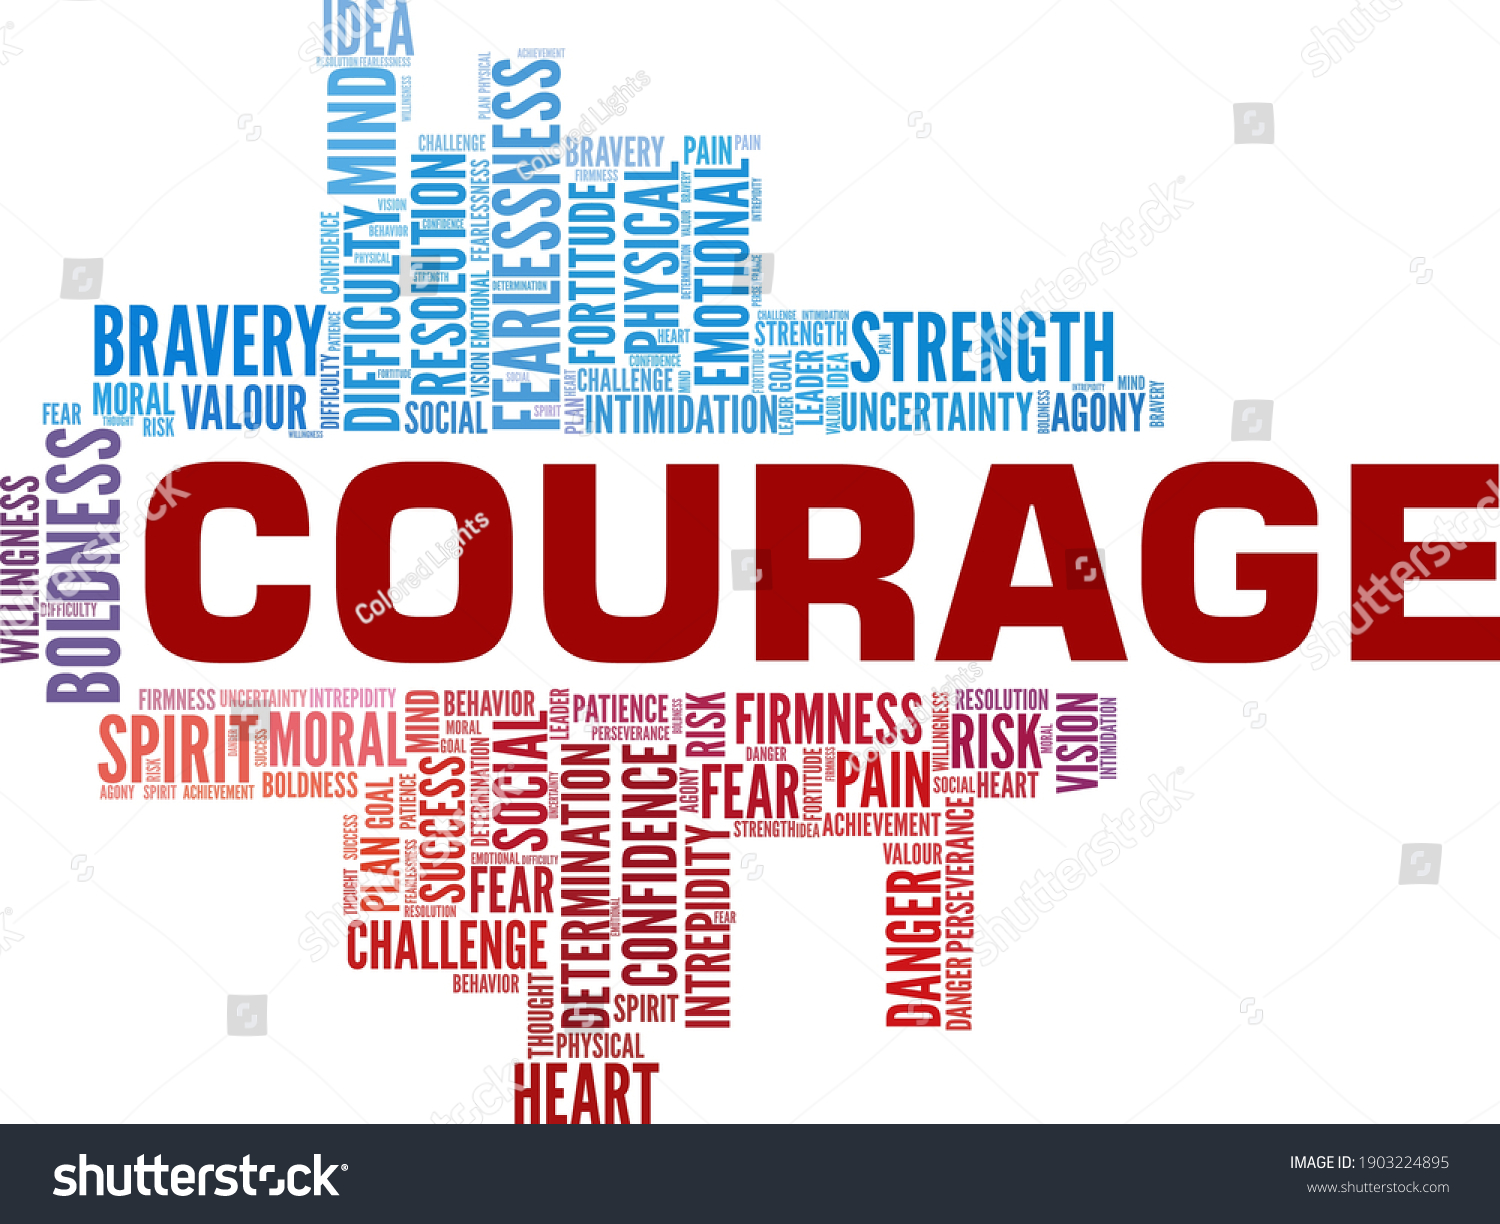 Courage Vector Illustration Word Cloud Isolated Stock Vector (Royalty ...